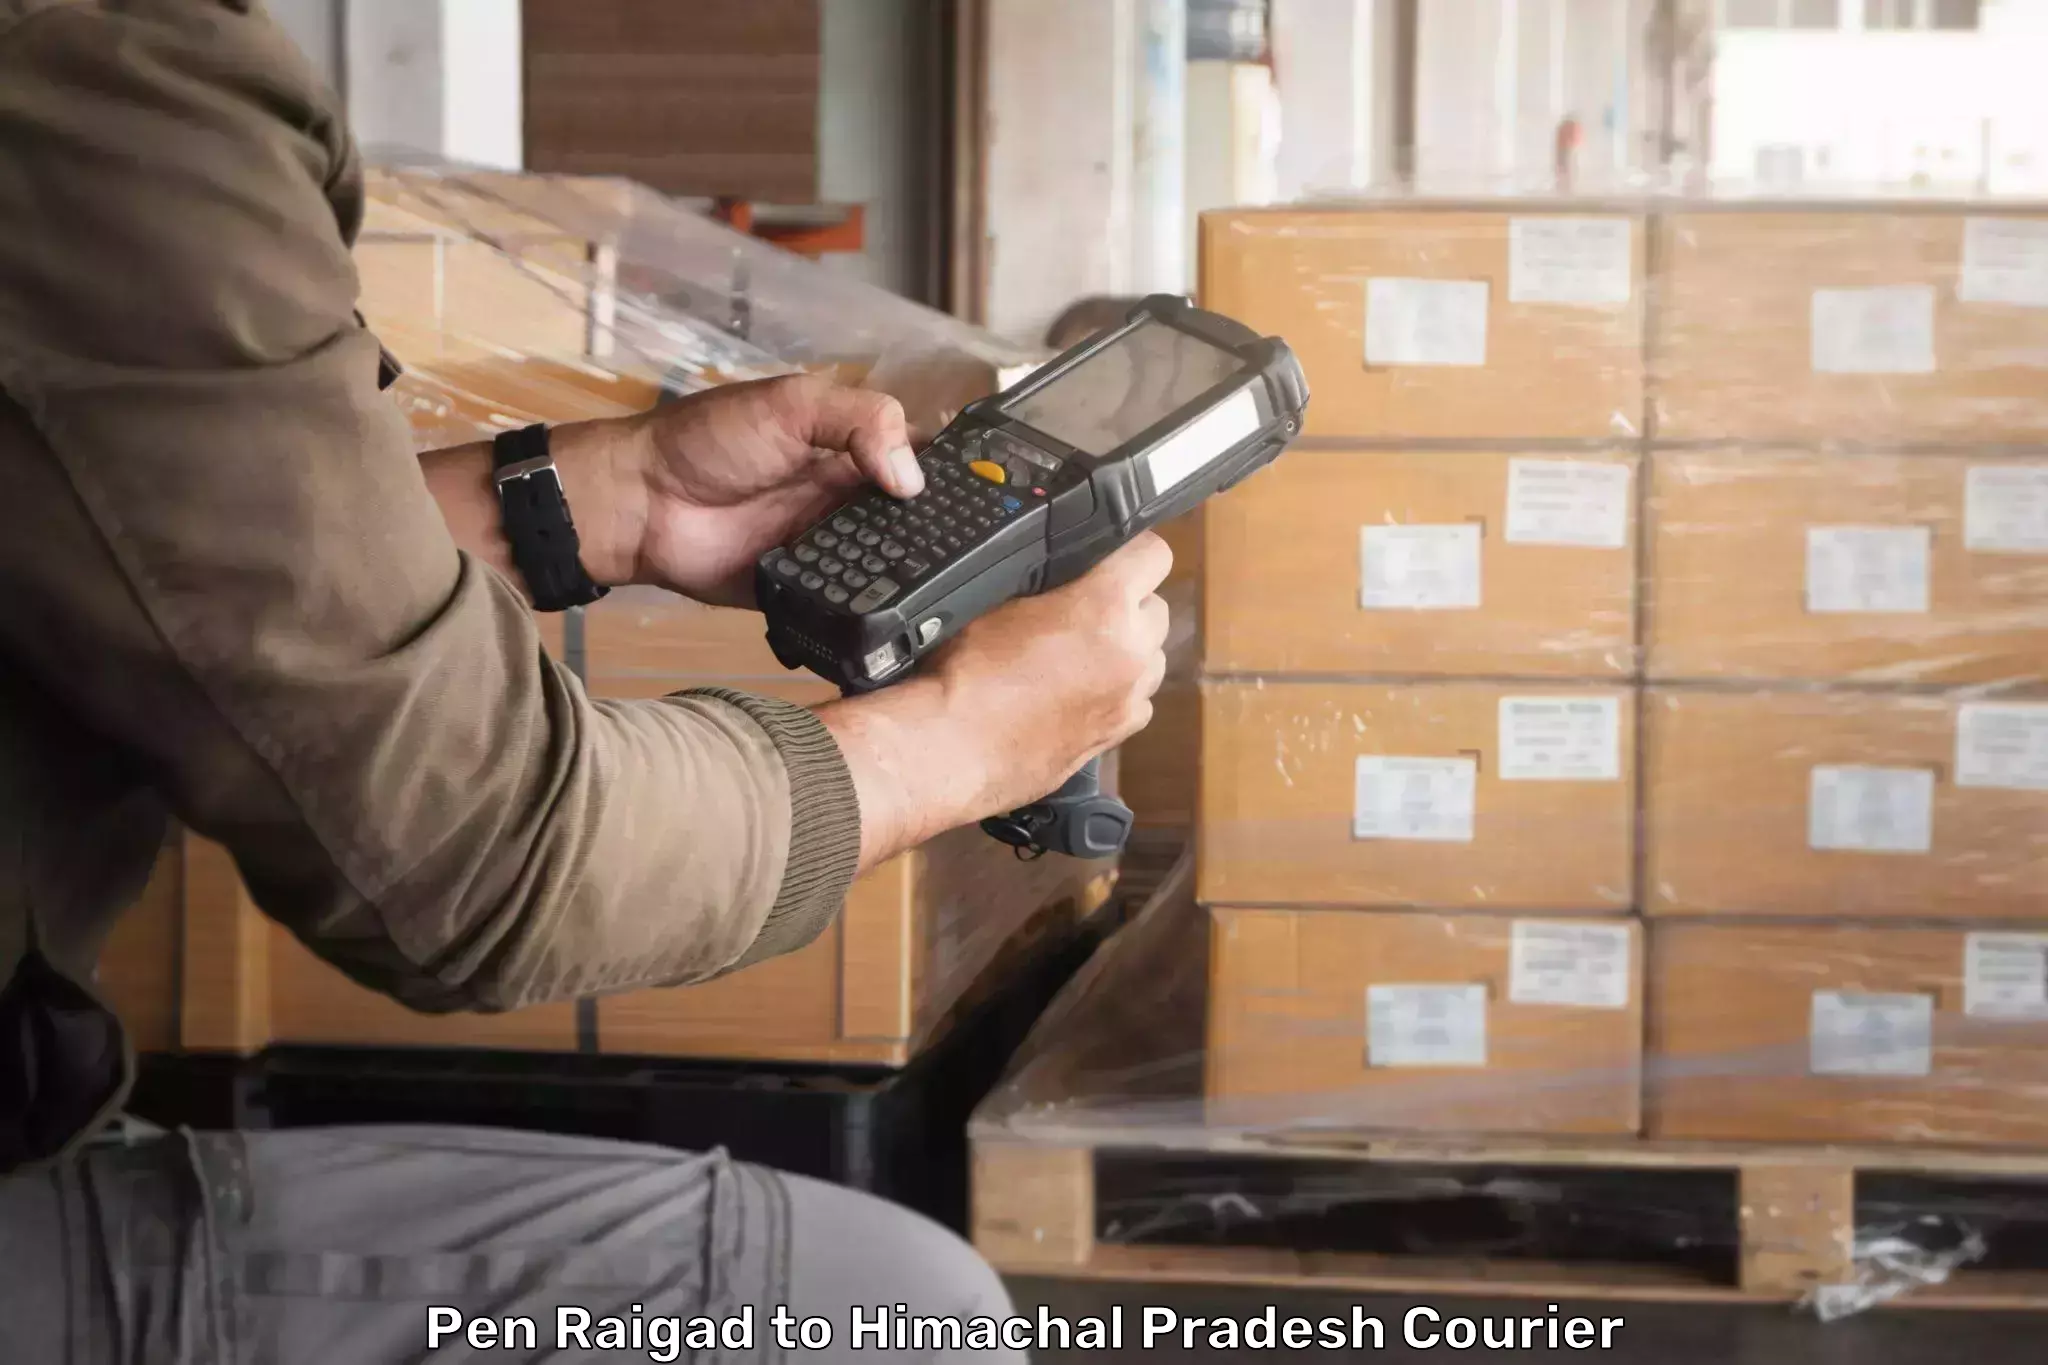 Express courier capabilities in Pen Raigad to Sundla